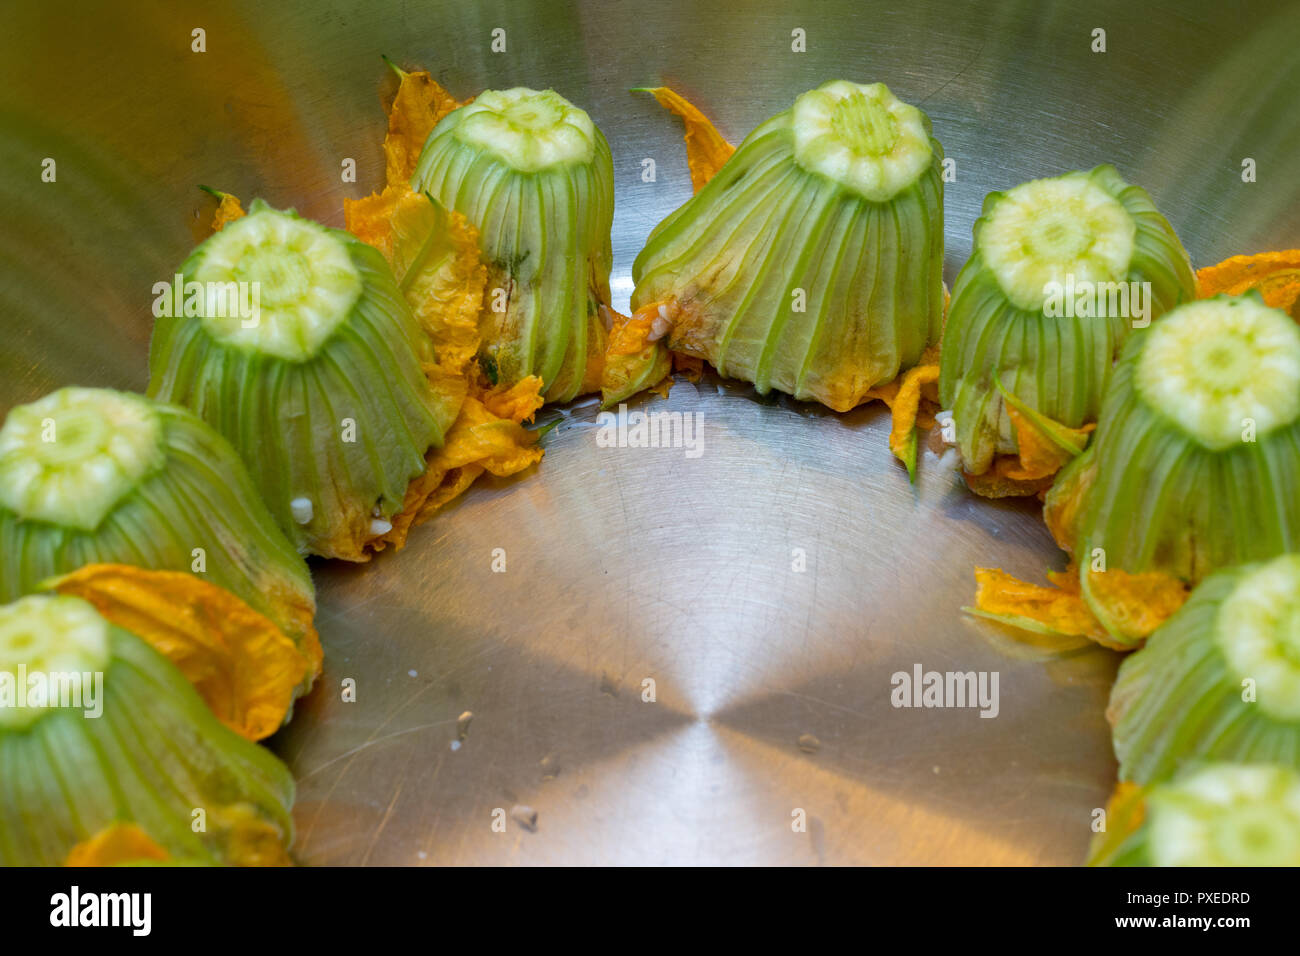 Cooking stuffed zucchini flowers / squash blossom - an Italian and Greek delicacy stuffed with rice, tomato, and herbs Stock Photo